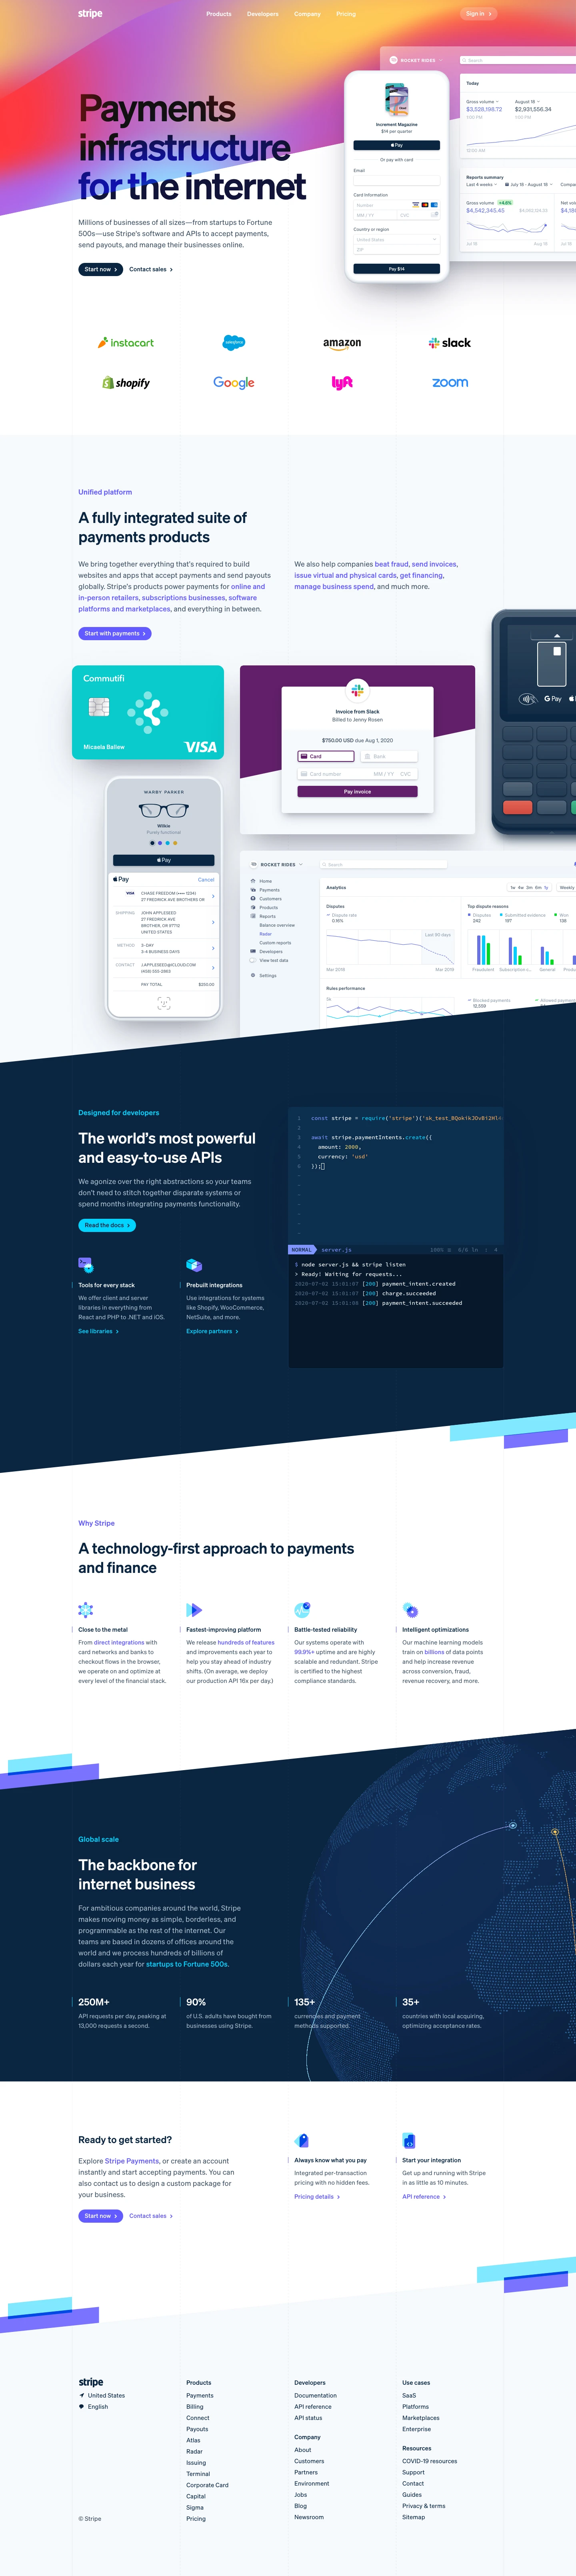 Stripe Landing Page Example: Online payment processing for internet businesses. Stripe is a suite of payment APIs that powers commerce for online businesses of all sizes, including fraud prevention, and subscription management. Use Stripe’s payment platform to accept and process payments online for easy-to-use commerce solutions.